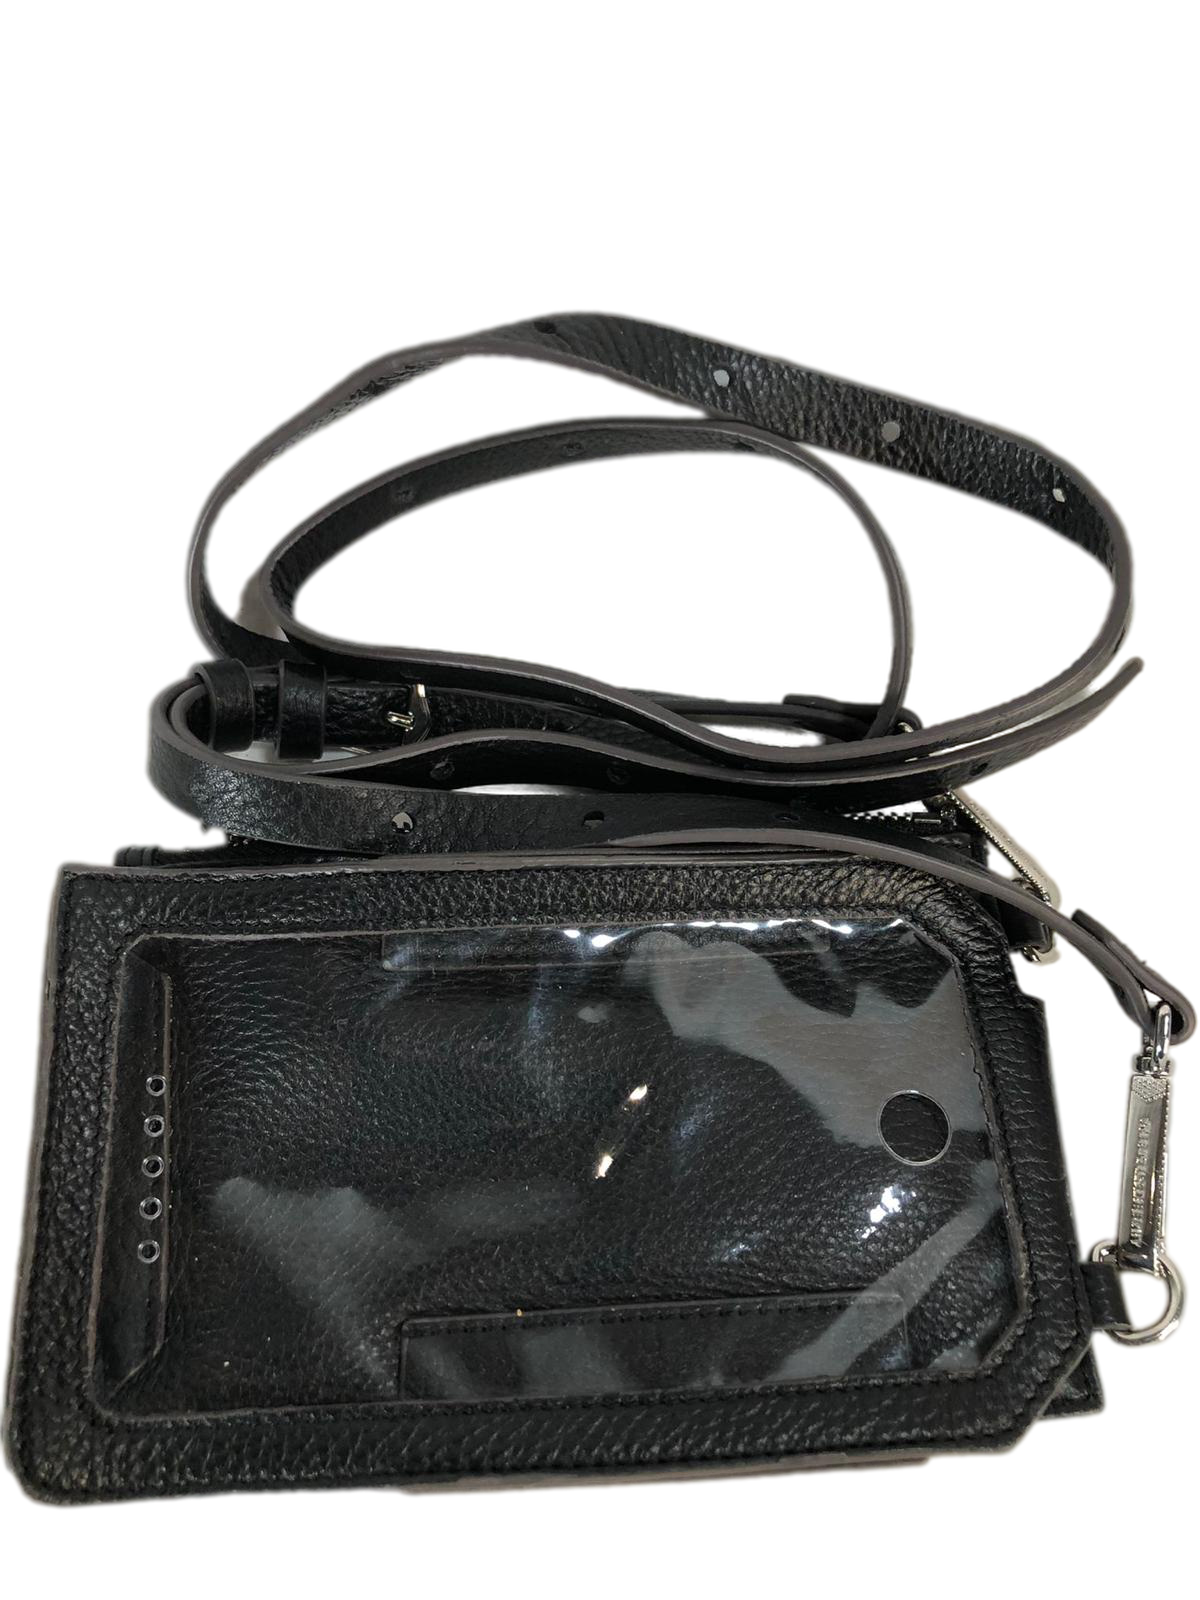 Aimee Kestenberg All My Heart Leather Pouch in Black with Gold